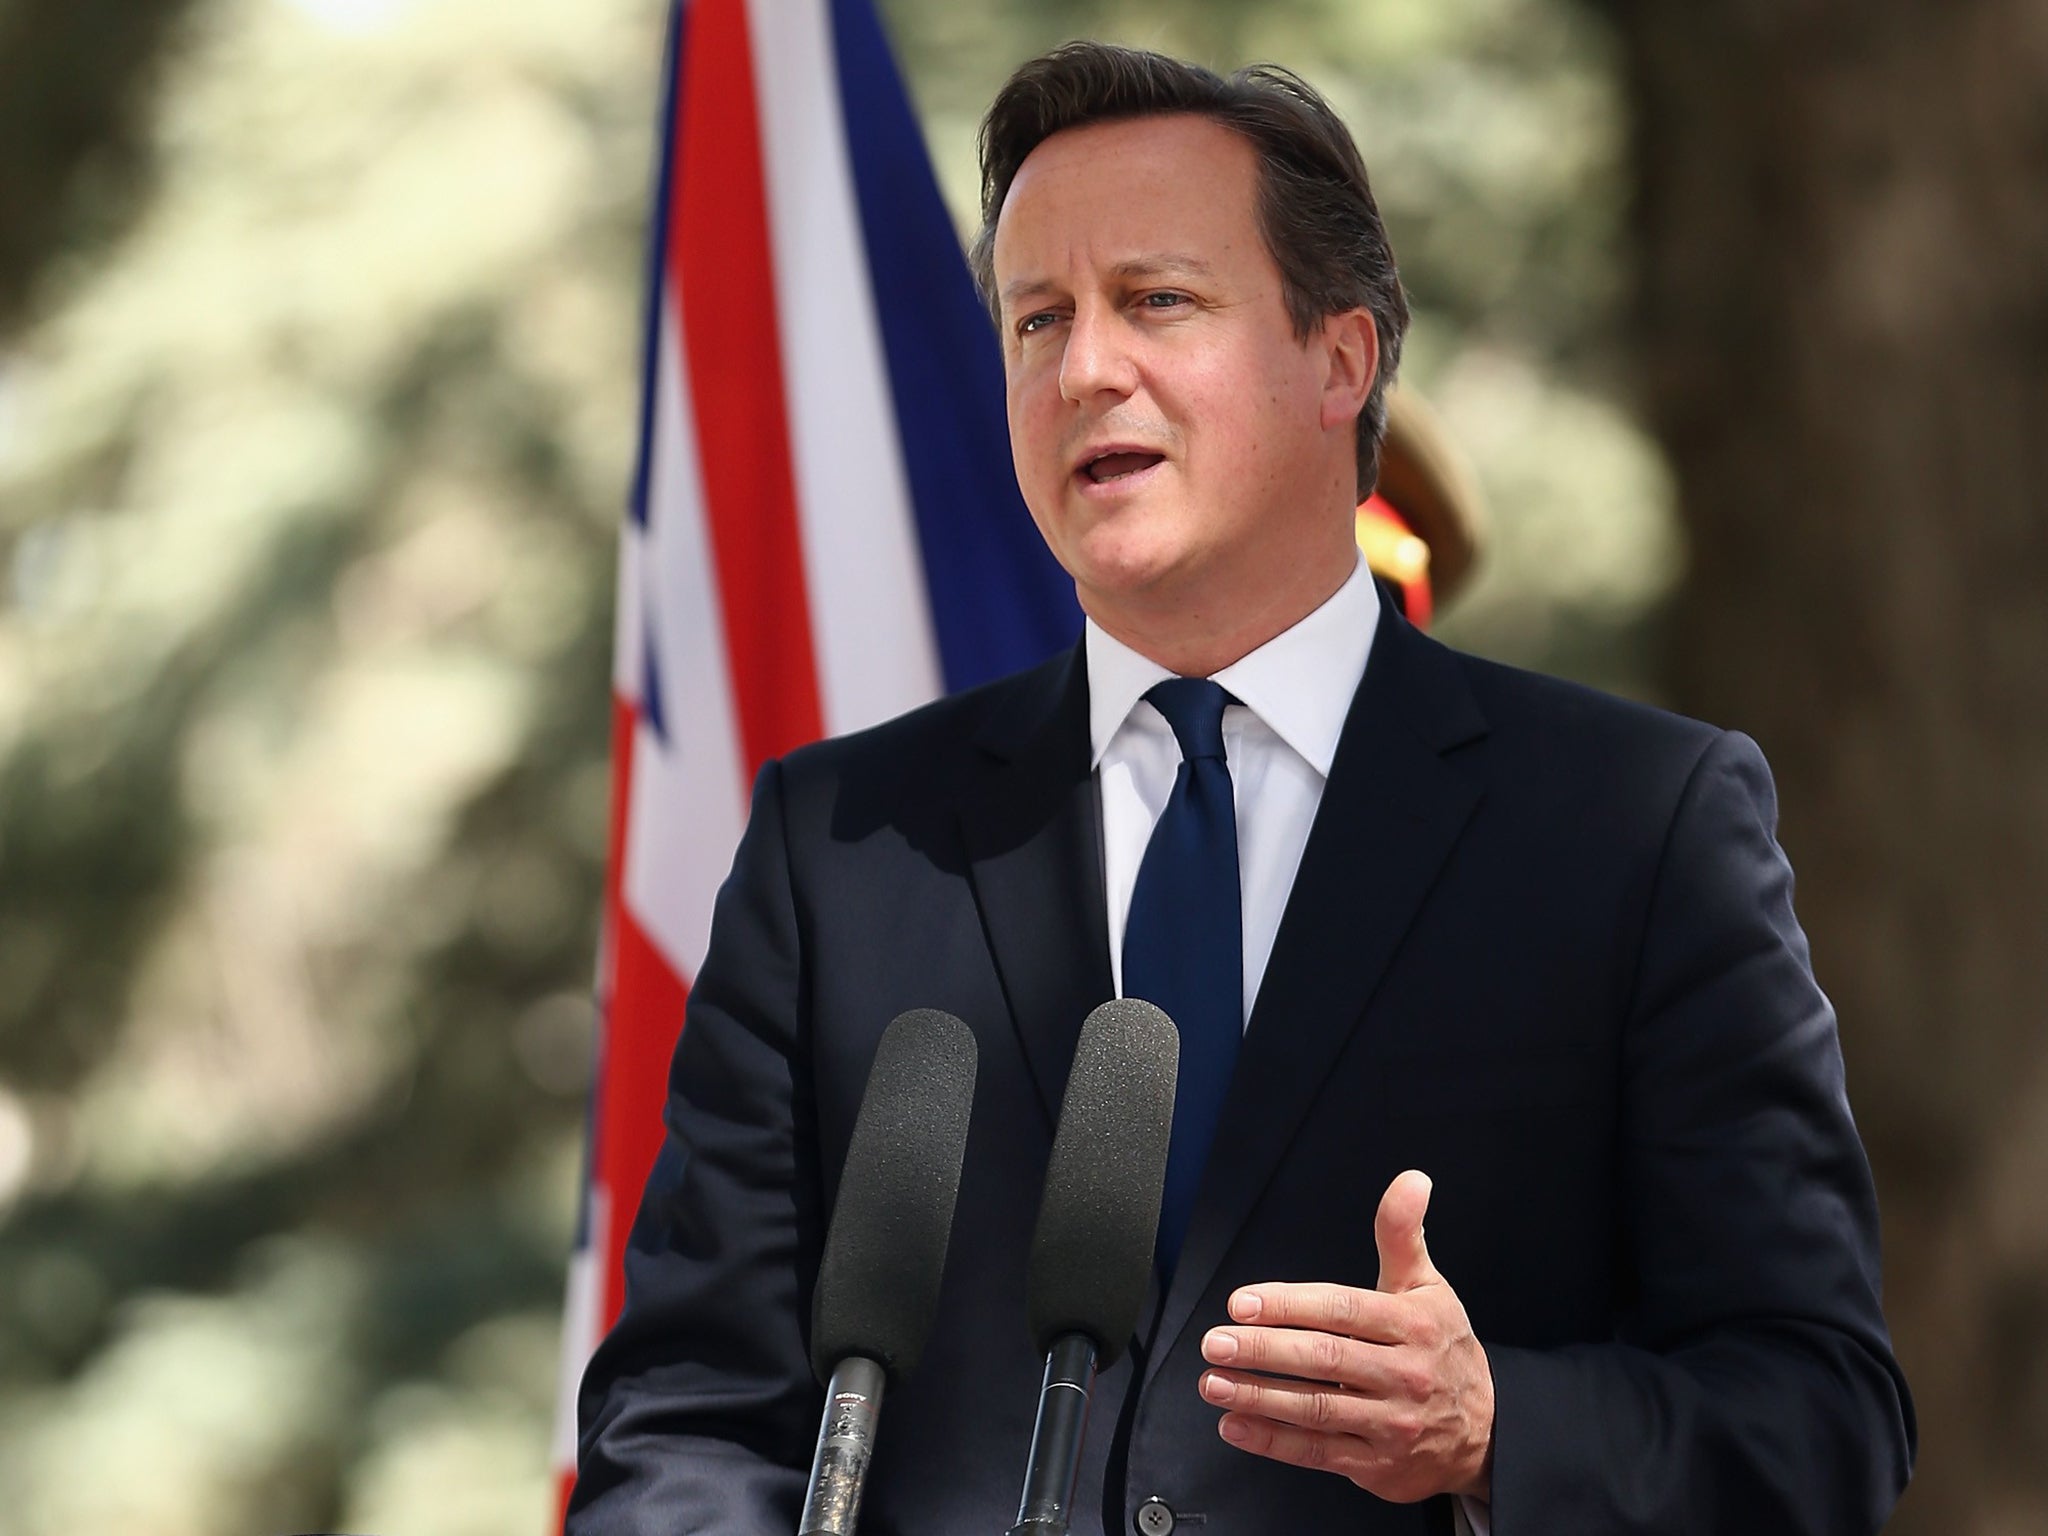 David Cameron was speaking during his visit to Afghanistan